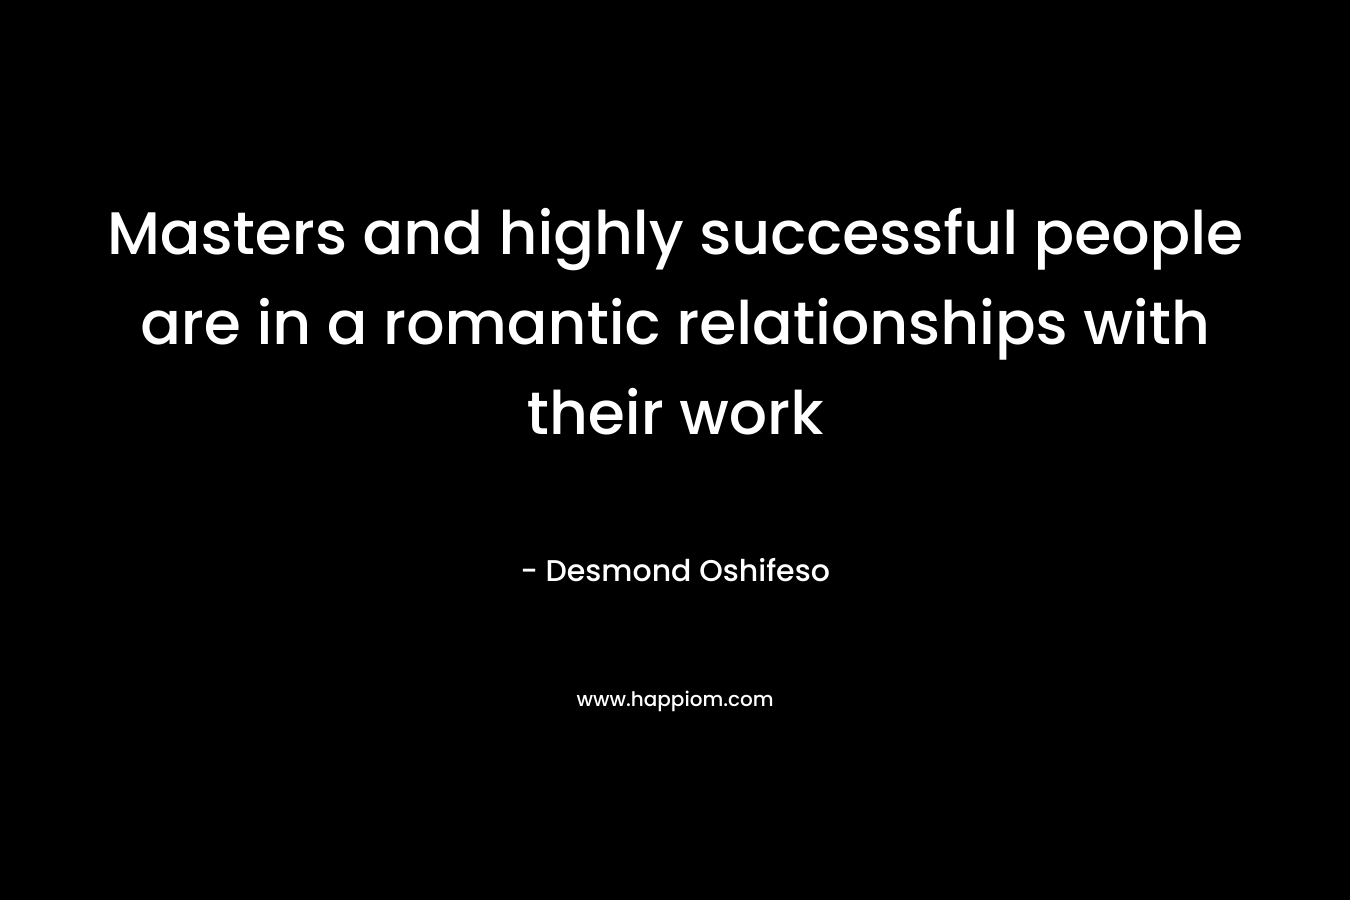 Masters and highly successful people are in a romantic relationships with their work